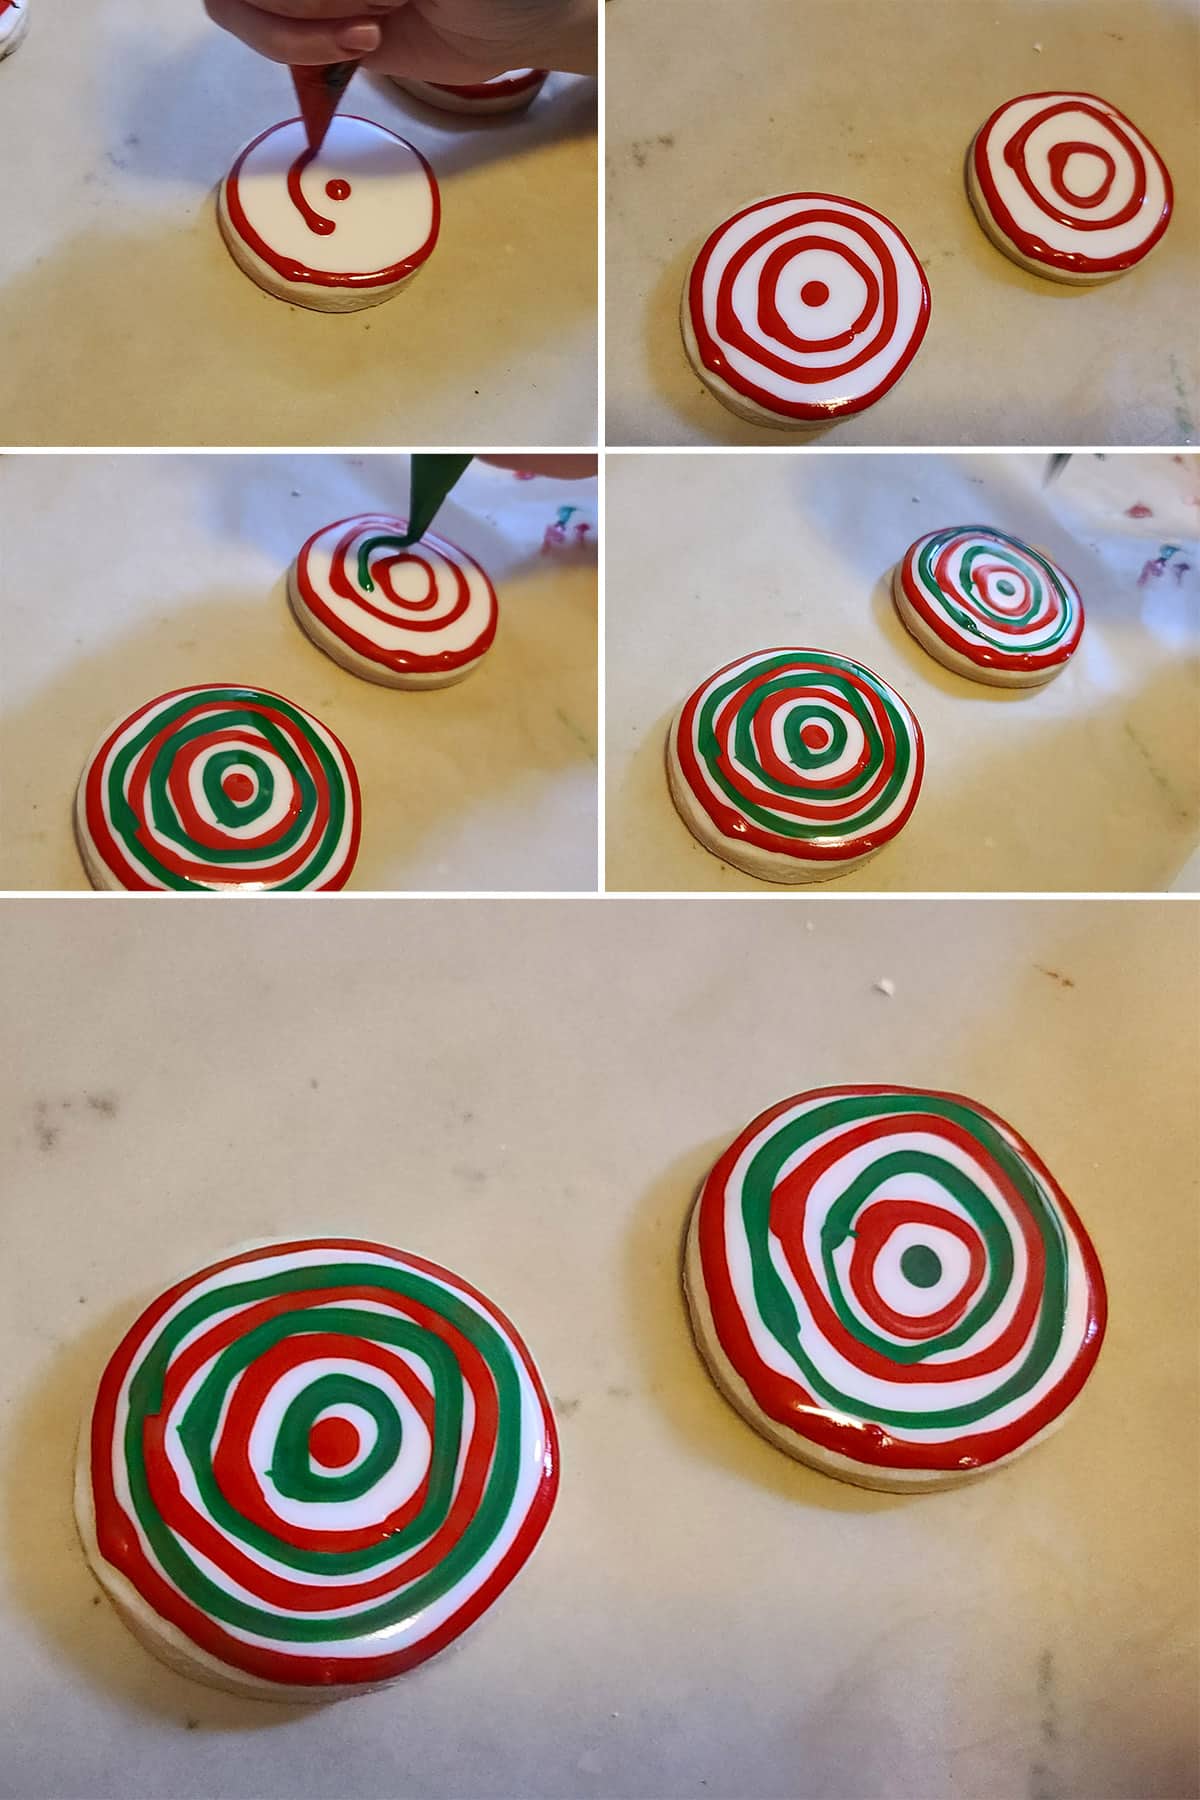 A 5 part image showing red and green concentric circles being piped onto a cookie that’s been frosted white.